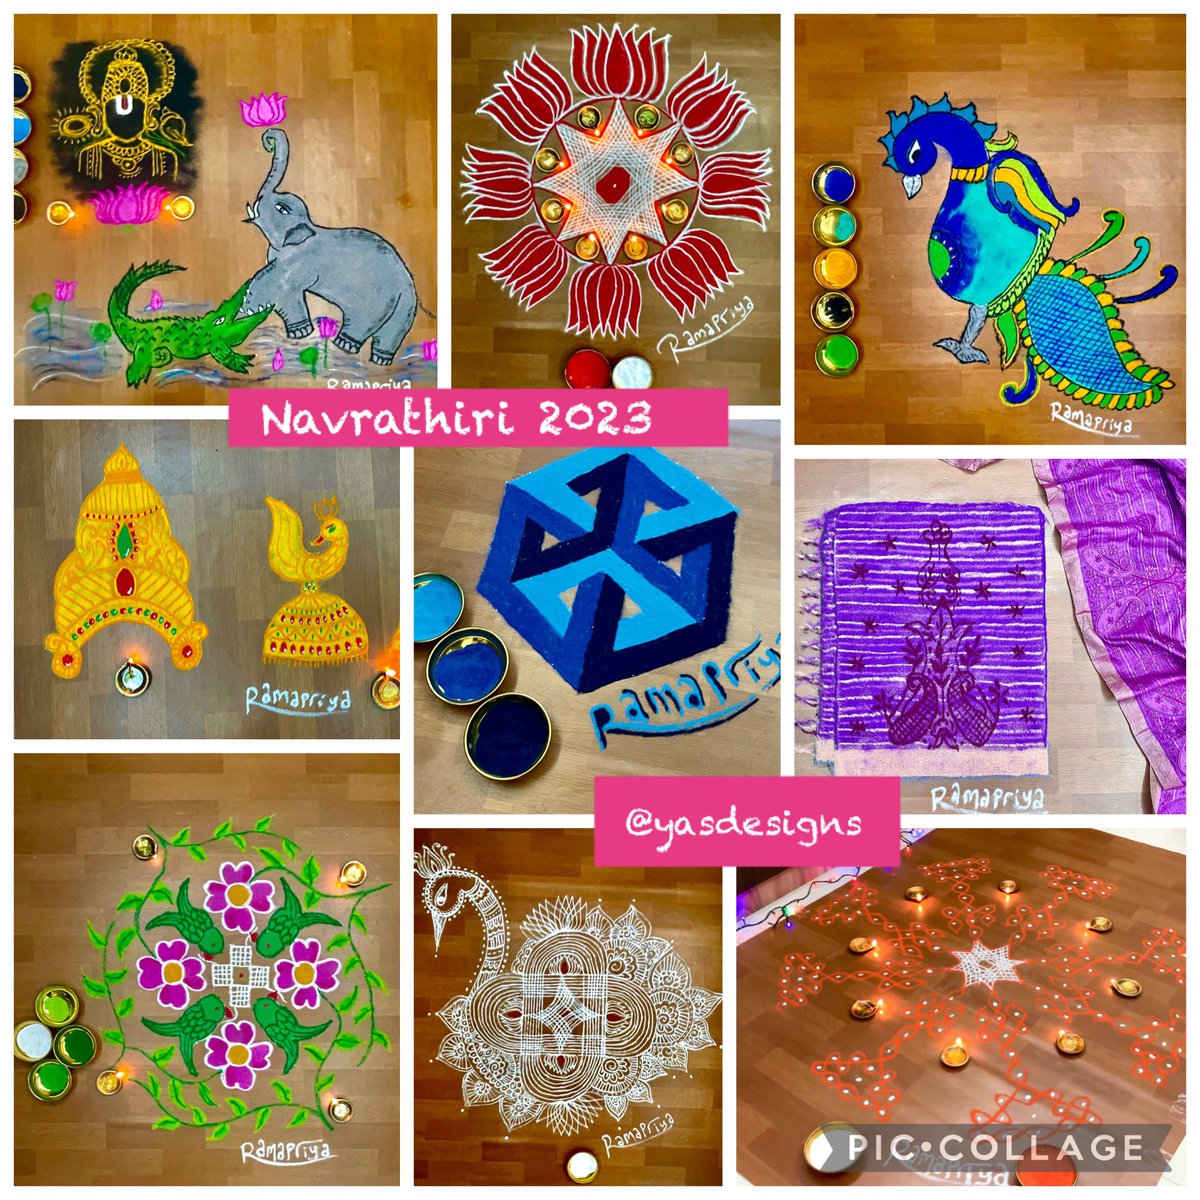 9 days of Navrathiri festival & drawing #kolams. It made me wonder “Am I able to draw a kolam because I am joyful or does drawing kolam makes me joyful? What happens during this creative process that makes me want to do this even if I have to let go of my creation the next day?